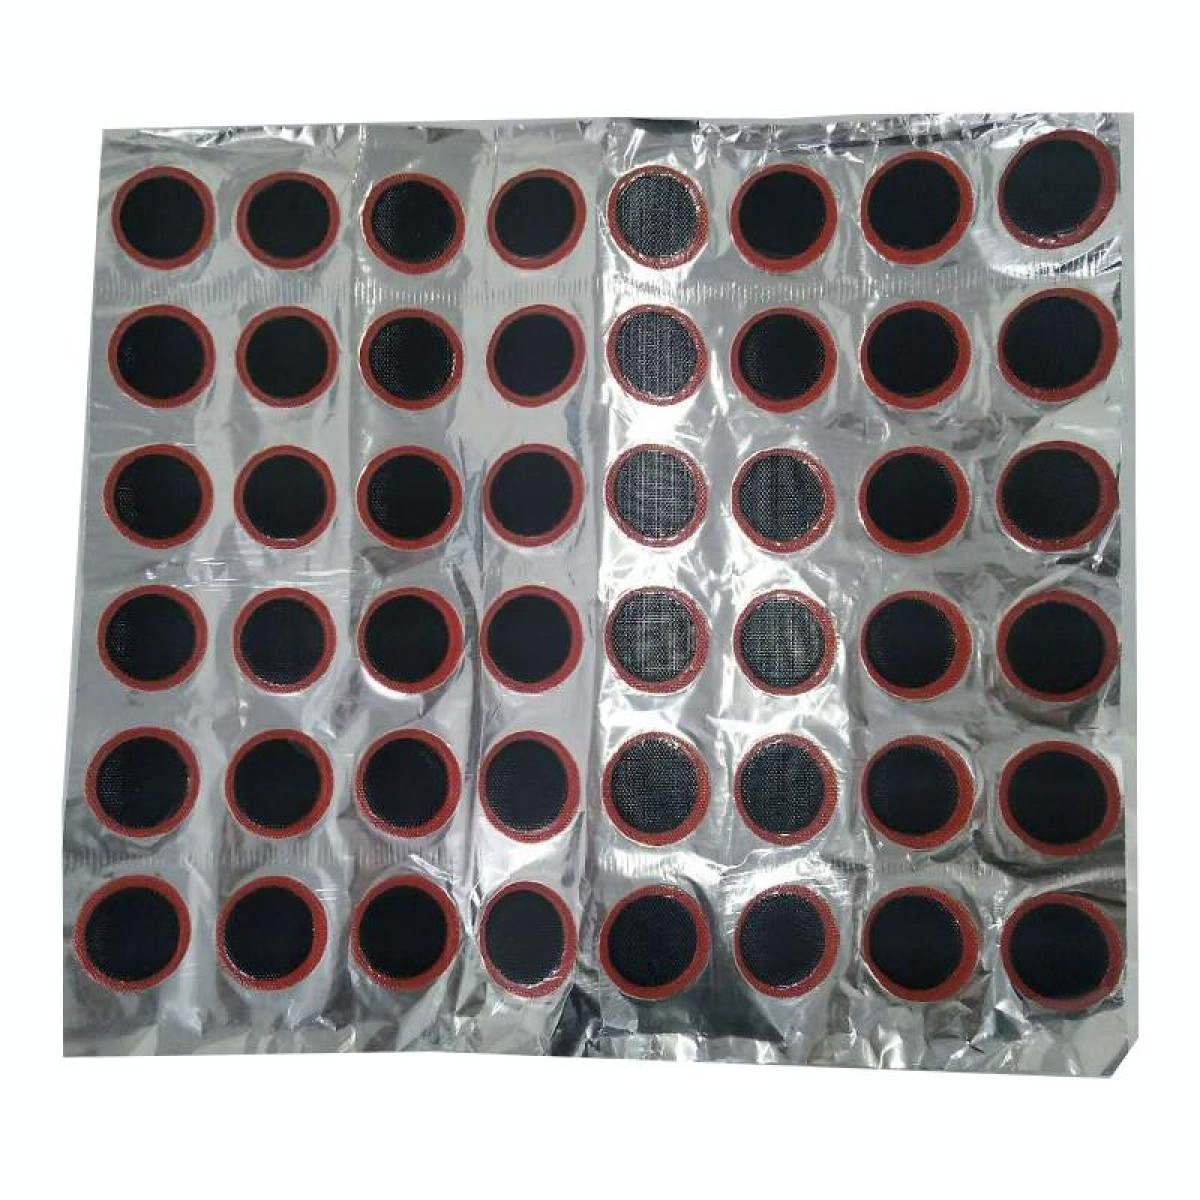 48 Pcs/Set Mountain Bicycle Bike Puncture Maintenance Tire Tyre Rubber Patch Kit Cycling Repairing Tools